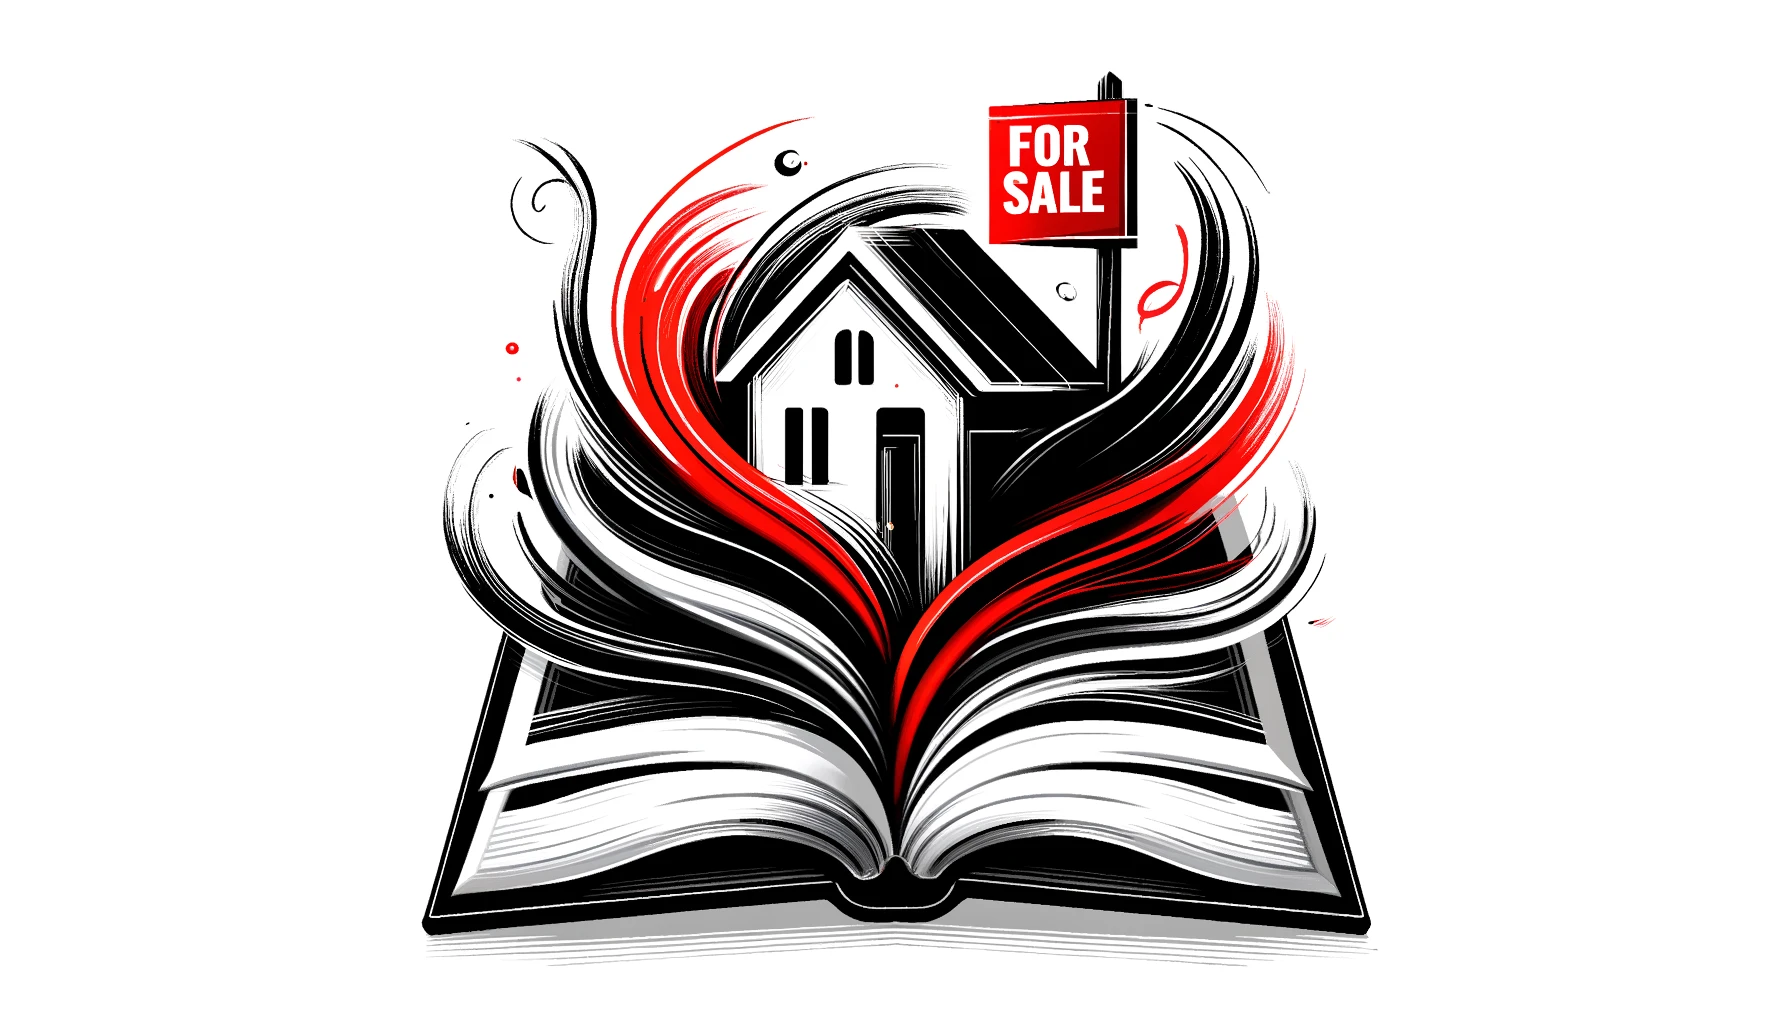 Abstract depiction of an open book with black and red strokes forming a house and a 'For Sale' sign, symbolizing a guide on how to sell my house.